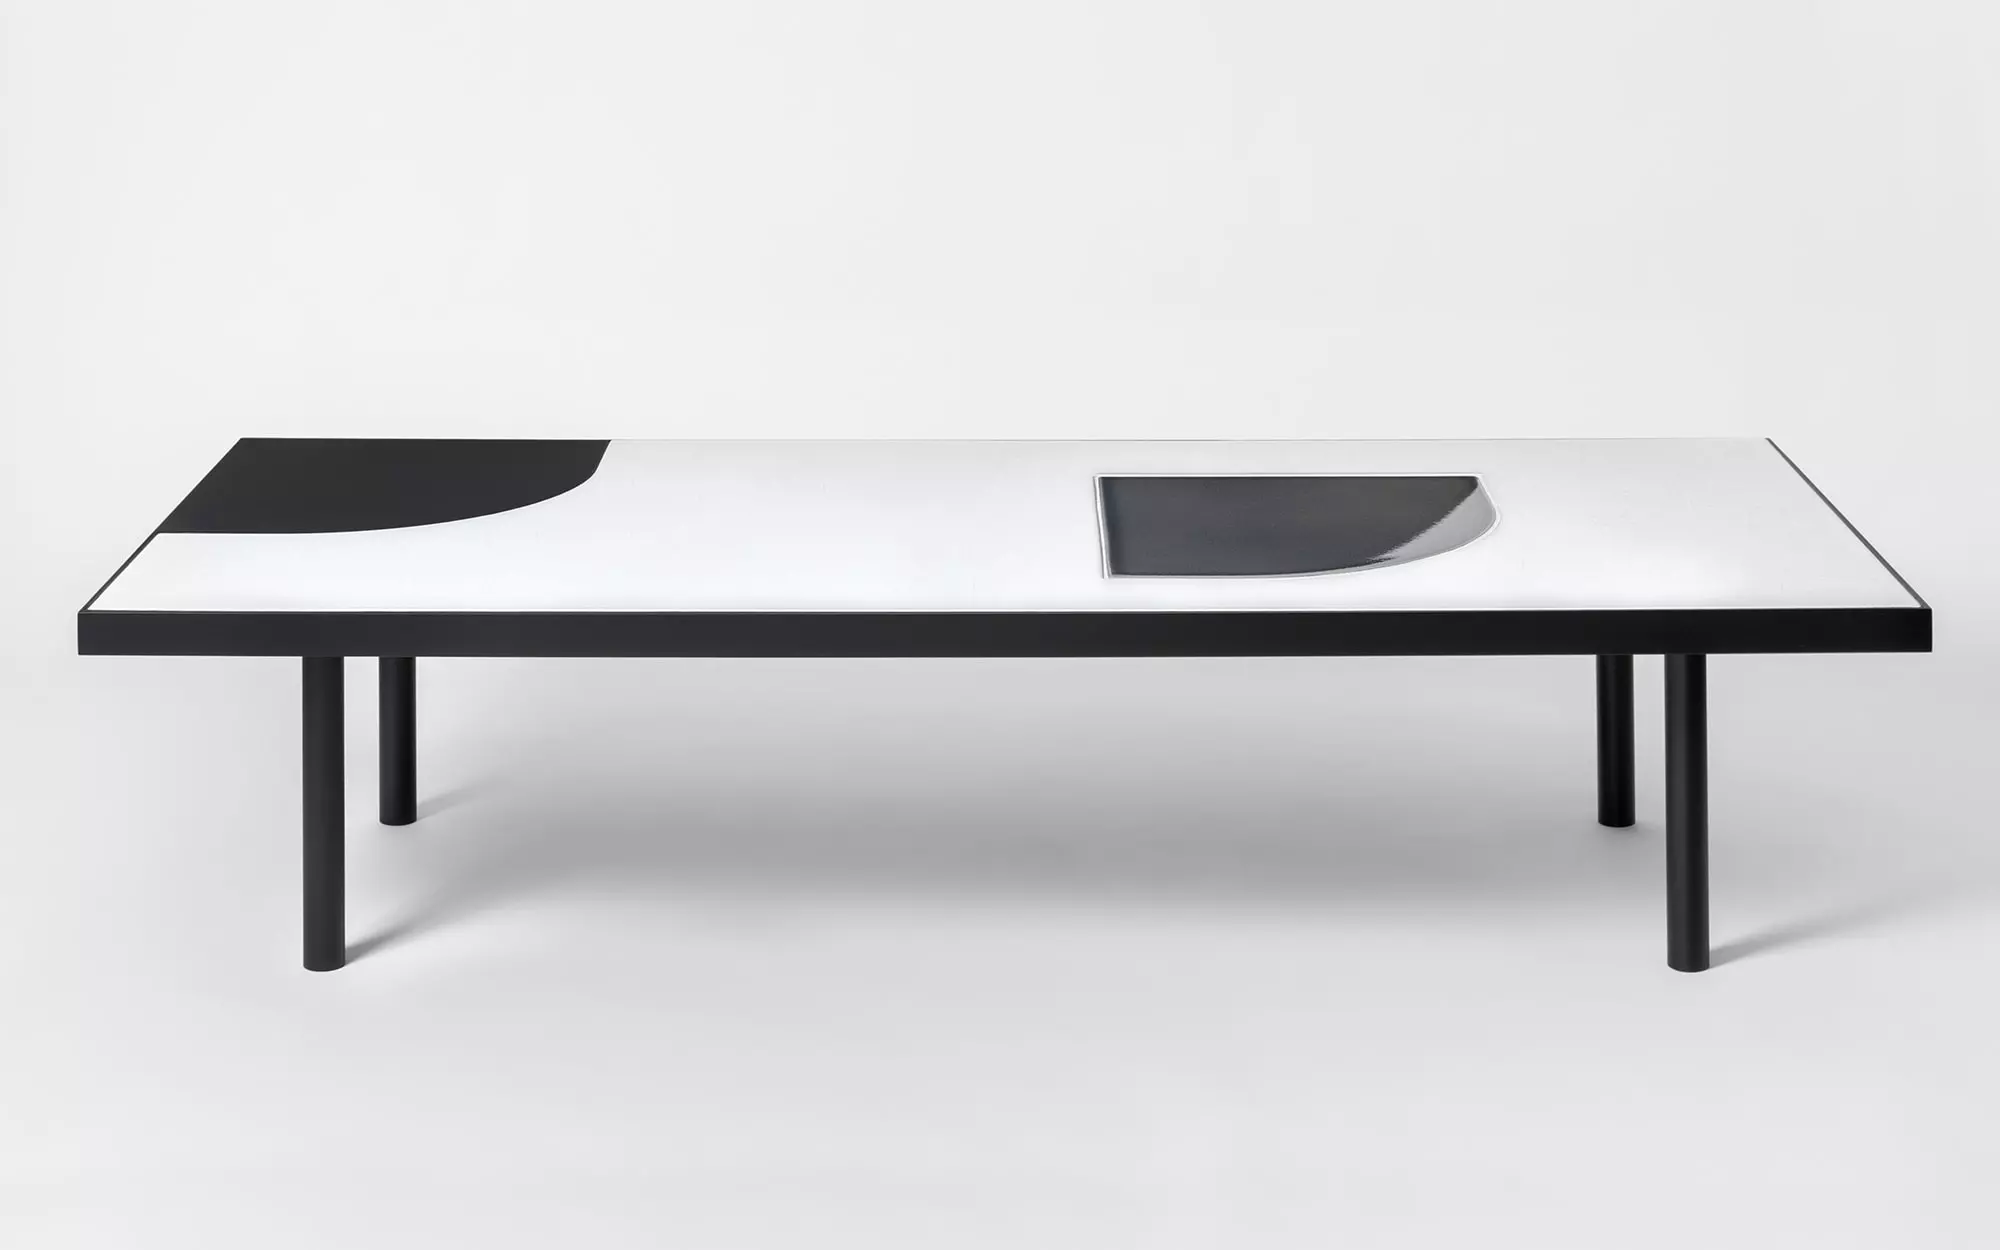 Translation Quadro Coffee Table - Pierre Charpin - @home new chapter .